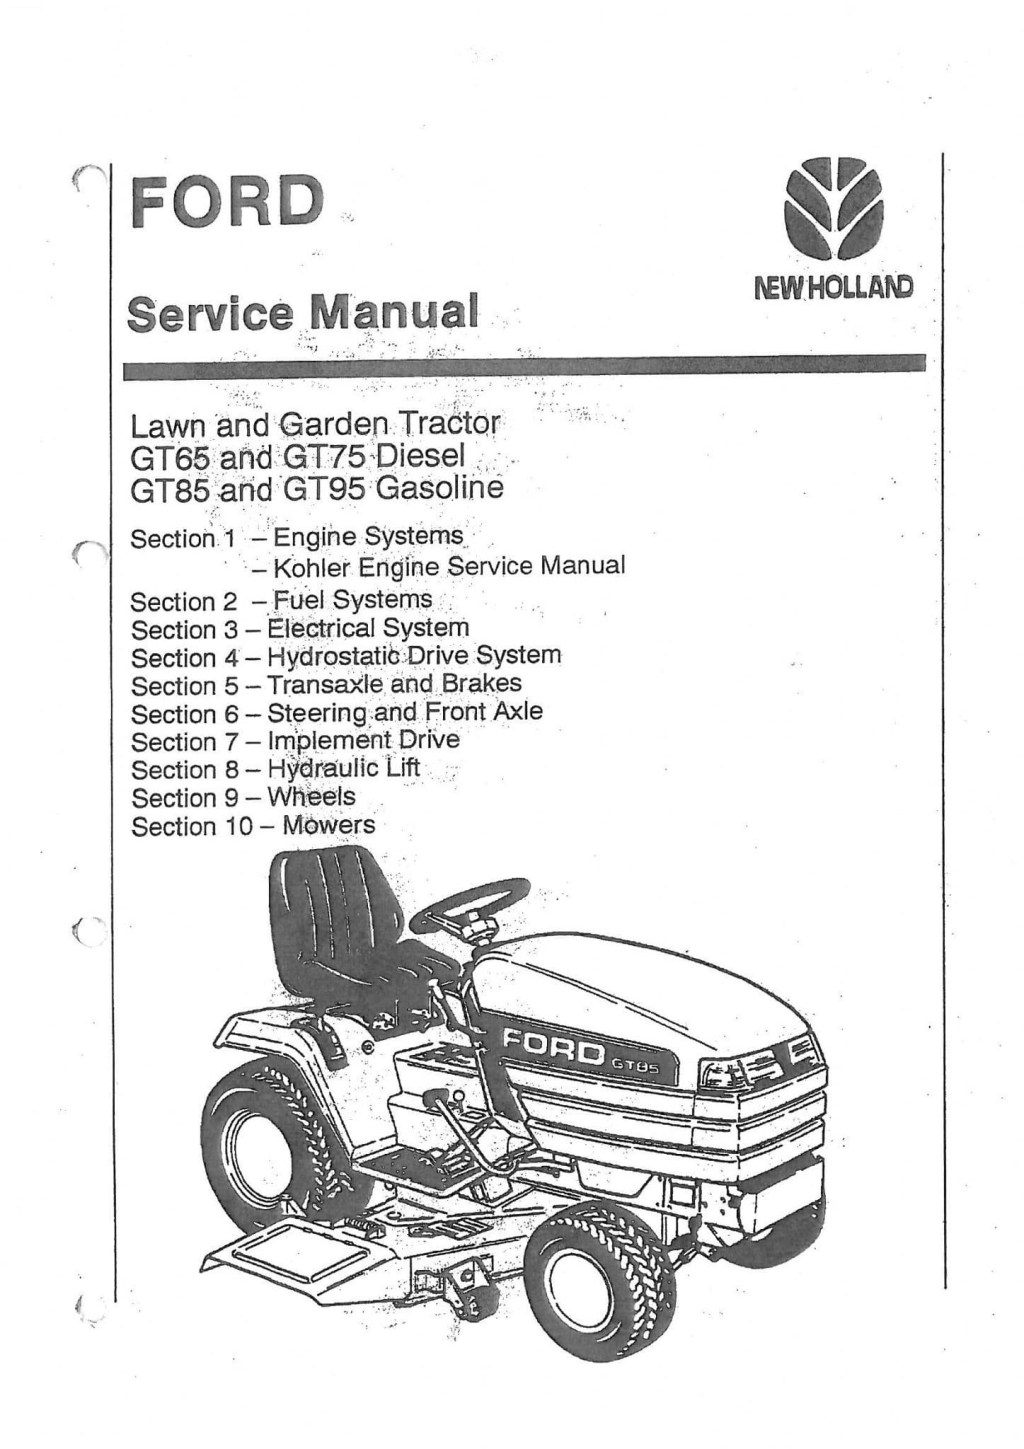 Picture of: Ford Garden and Lawn Tractor GT GT GT GT Workshop Service Manual  Electrical System, Drive